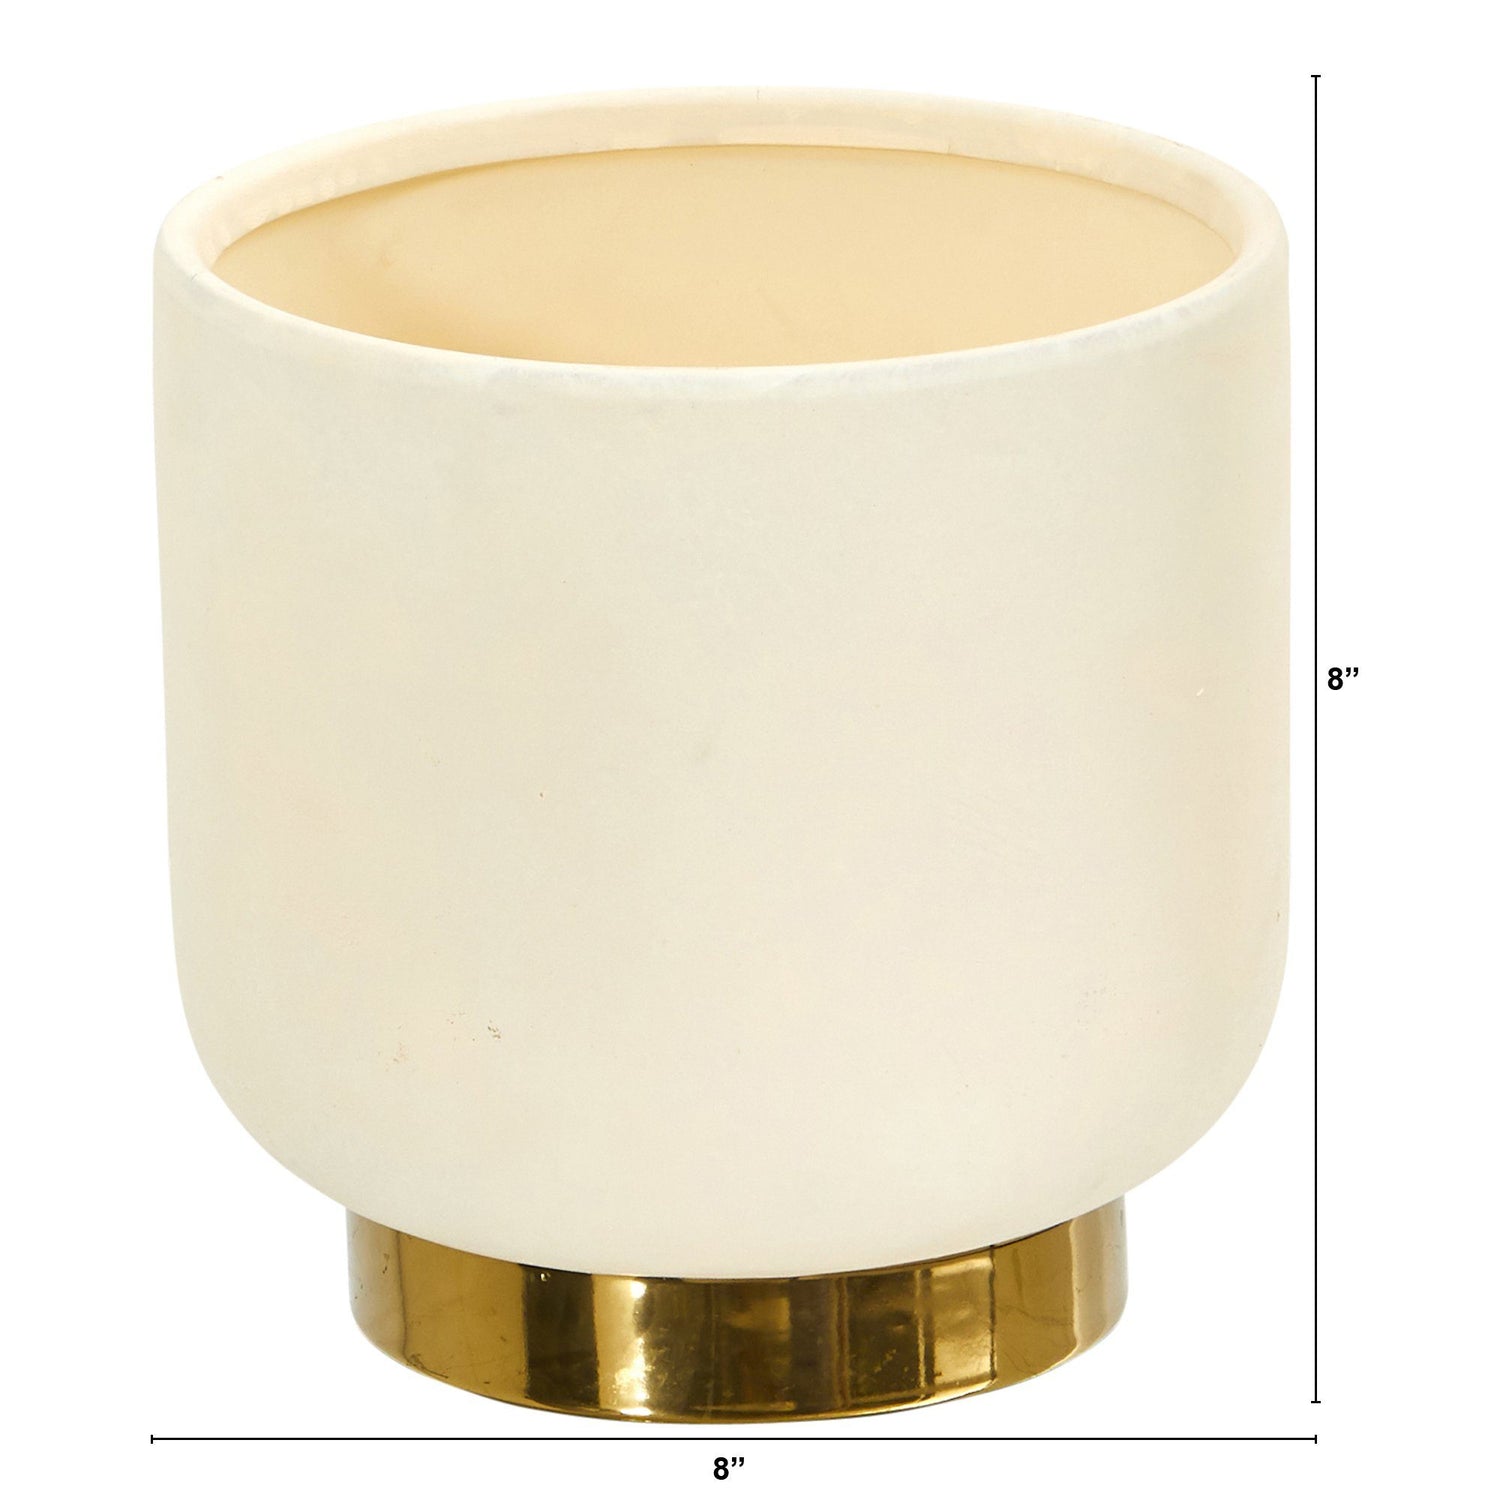 8” Elegance Ceramic Planter with Gold Accents